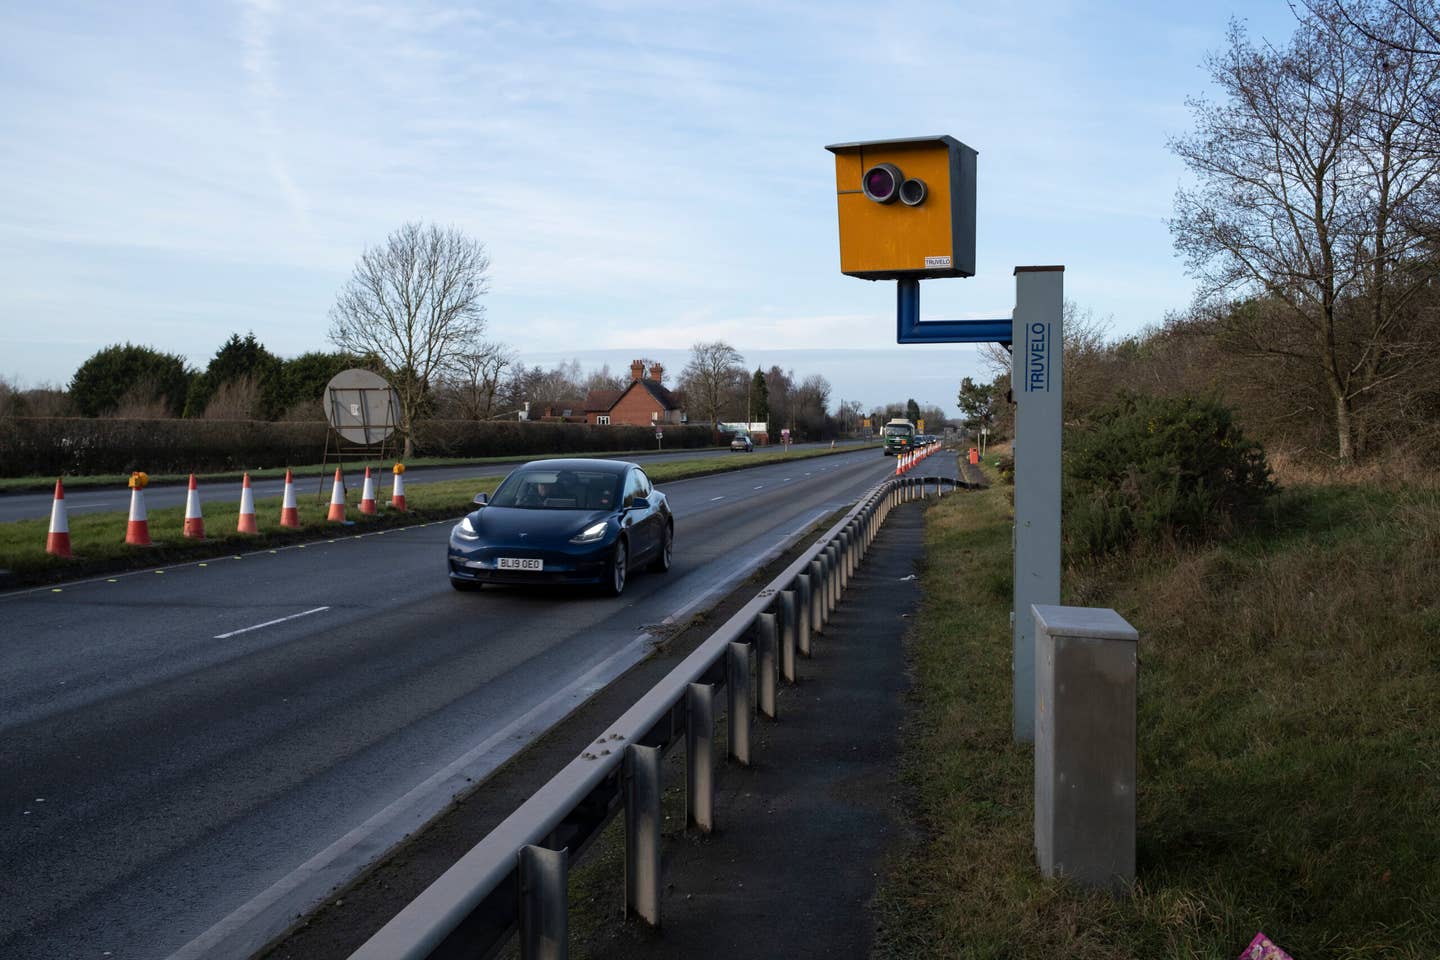 Cars passing a yellow speed camera on the A452 on 29th December 2021 in Berkswell, United Kingdom. A traffic enforcement camera is a camera which may be mounted beside or over a road or installed in an enforcement vehicle to detect traffic regulation violations, including speeding. (photo by Mike Kemp/In Pictures via Getty Images)